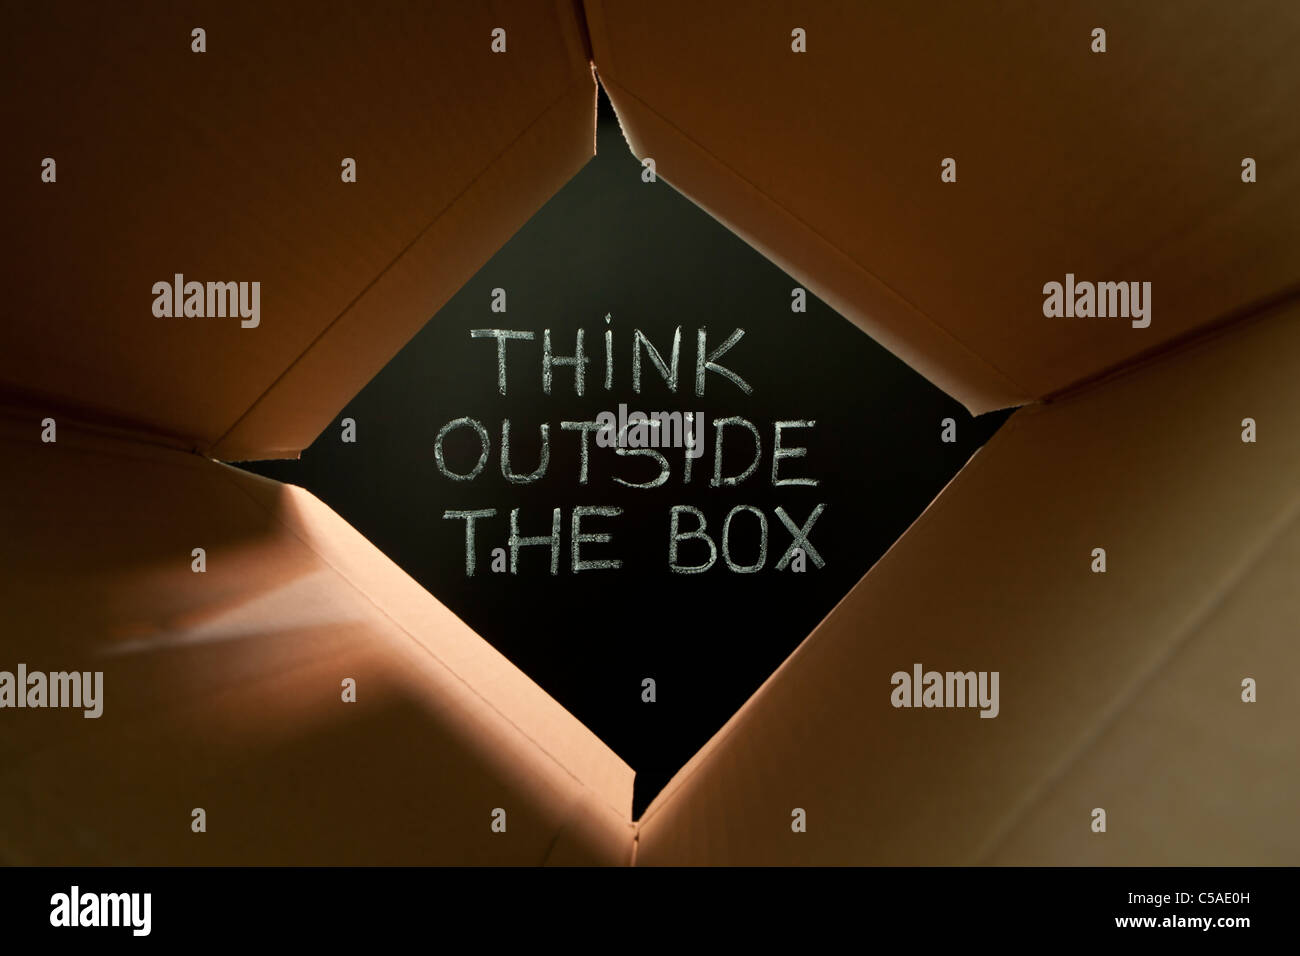 Concept image about unconventional or different thinking. 'Think outside the box' handwritten with white chalk on a blackboard. Stock Photo